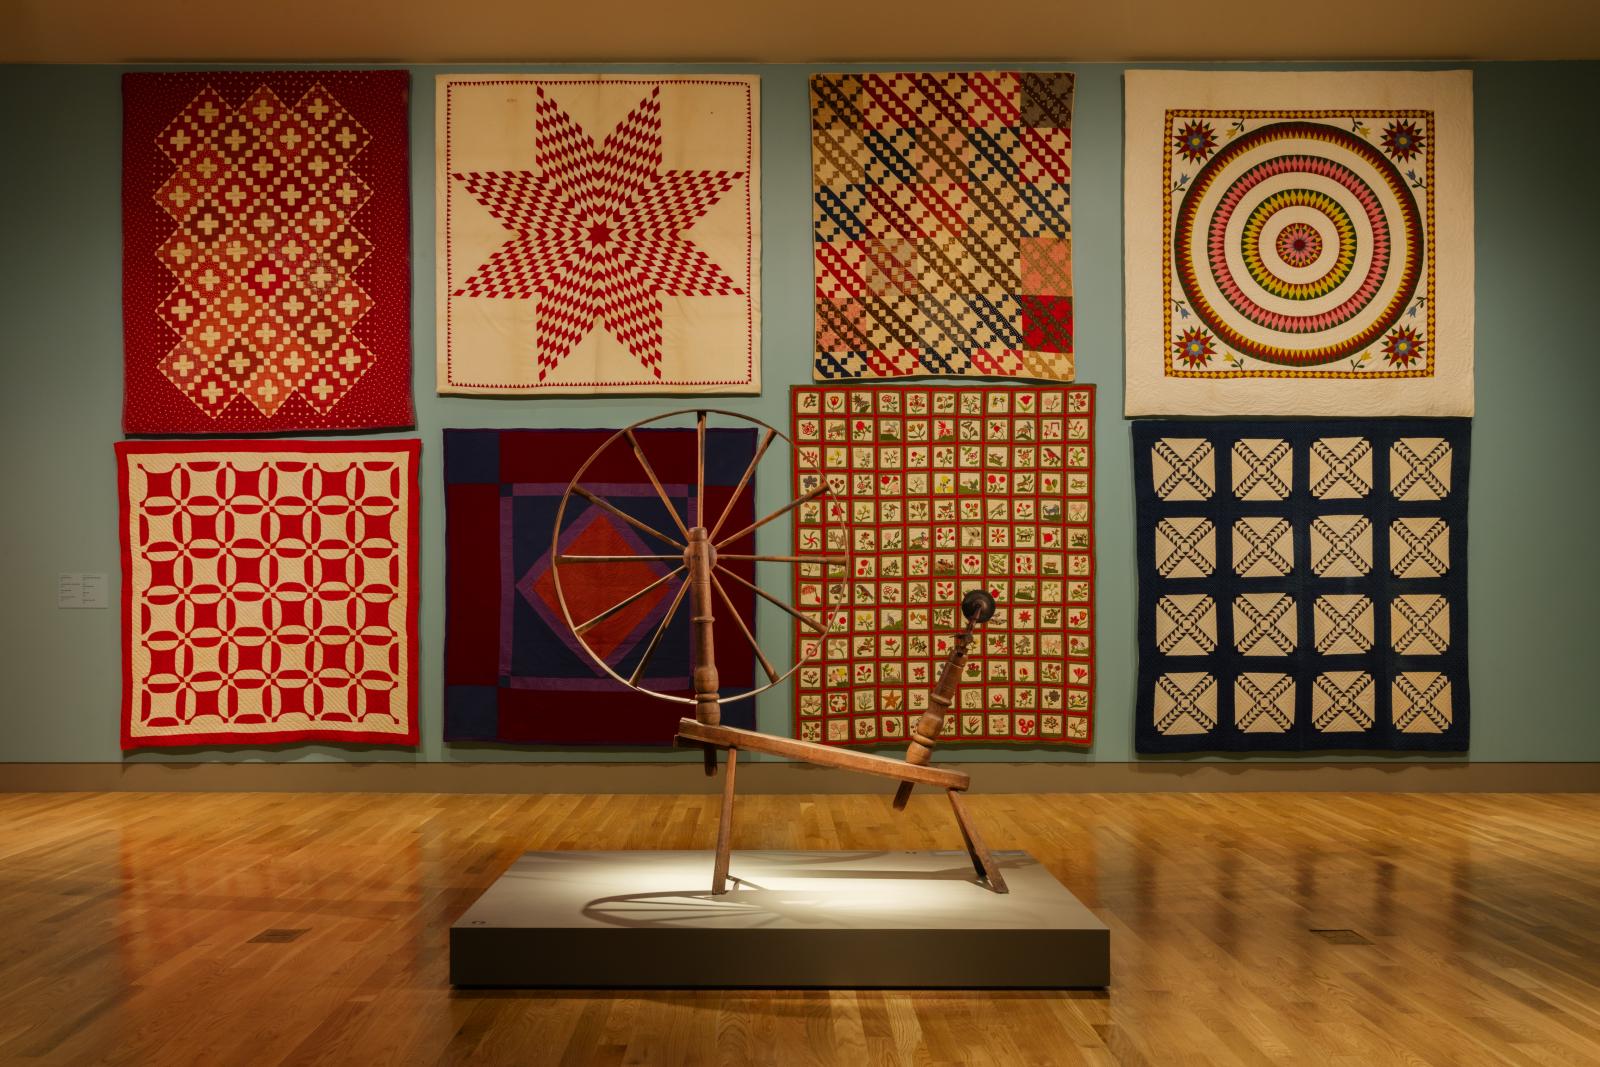 View of eight quilts displayed in a museum gallery with a spinning wheel placed in the center of the room.